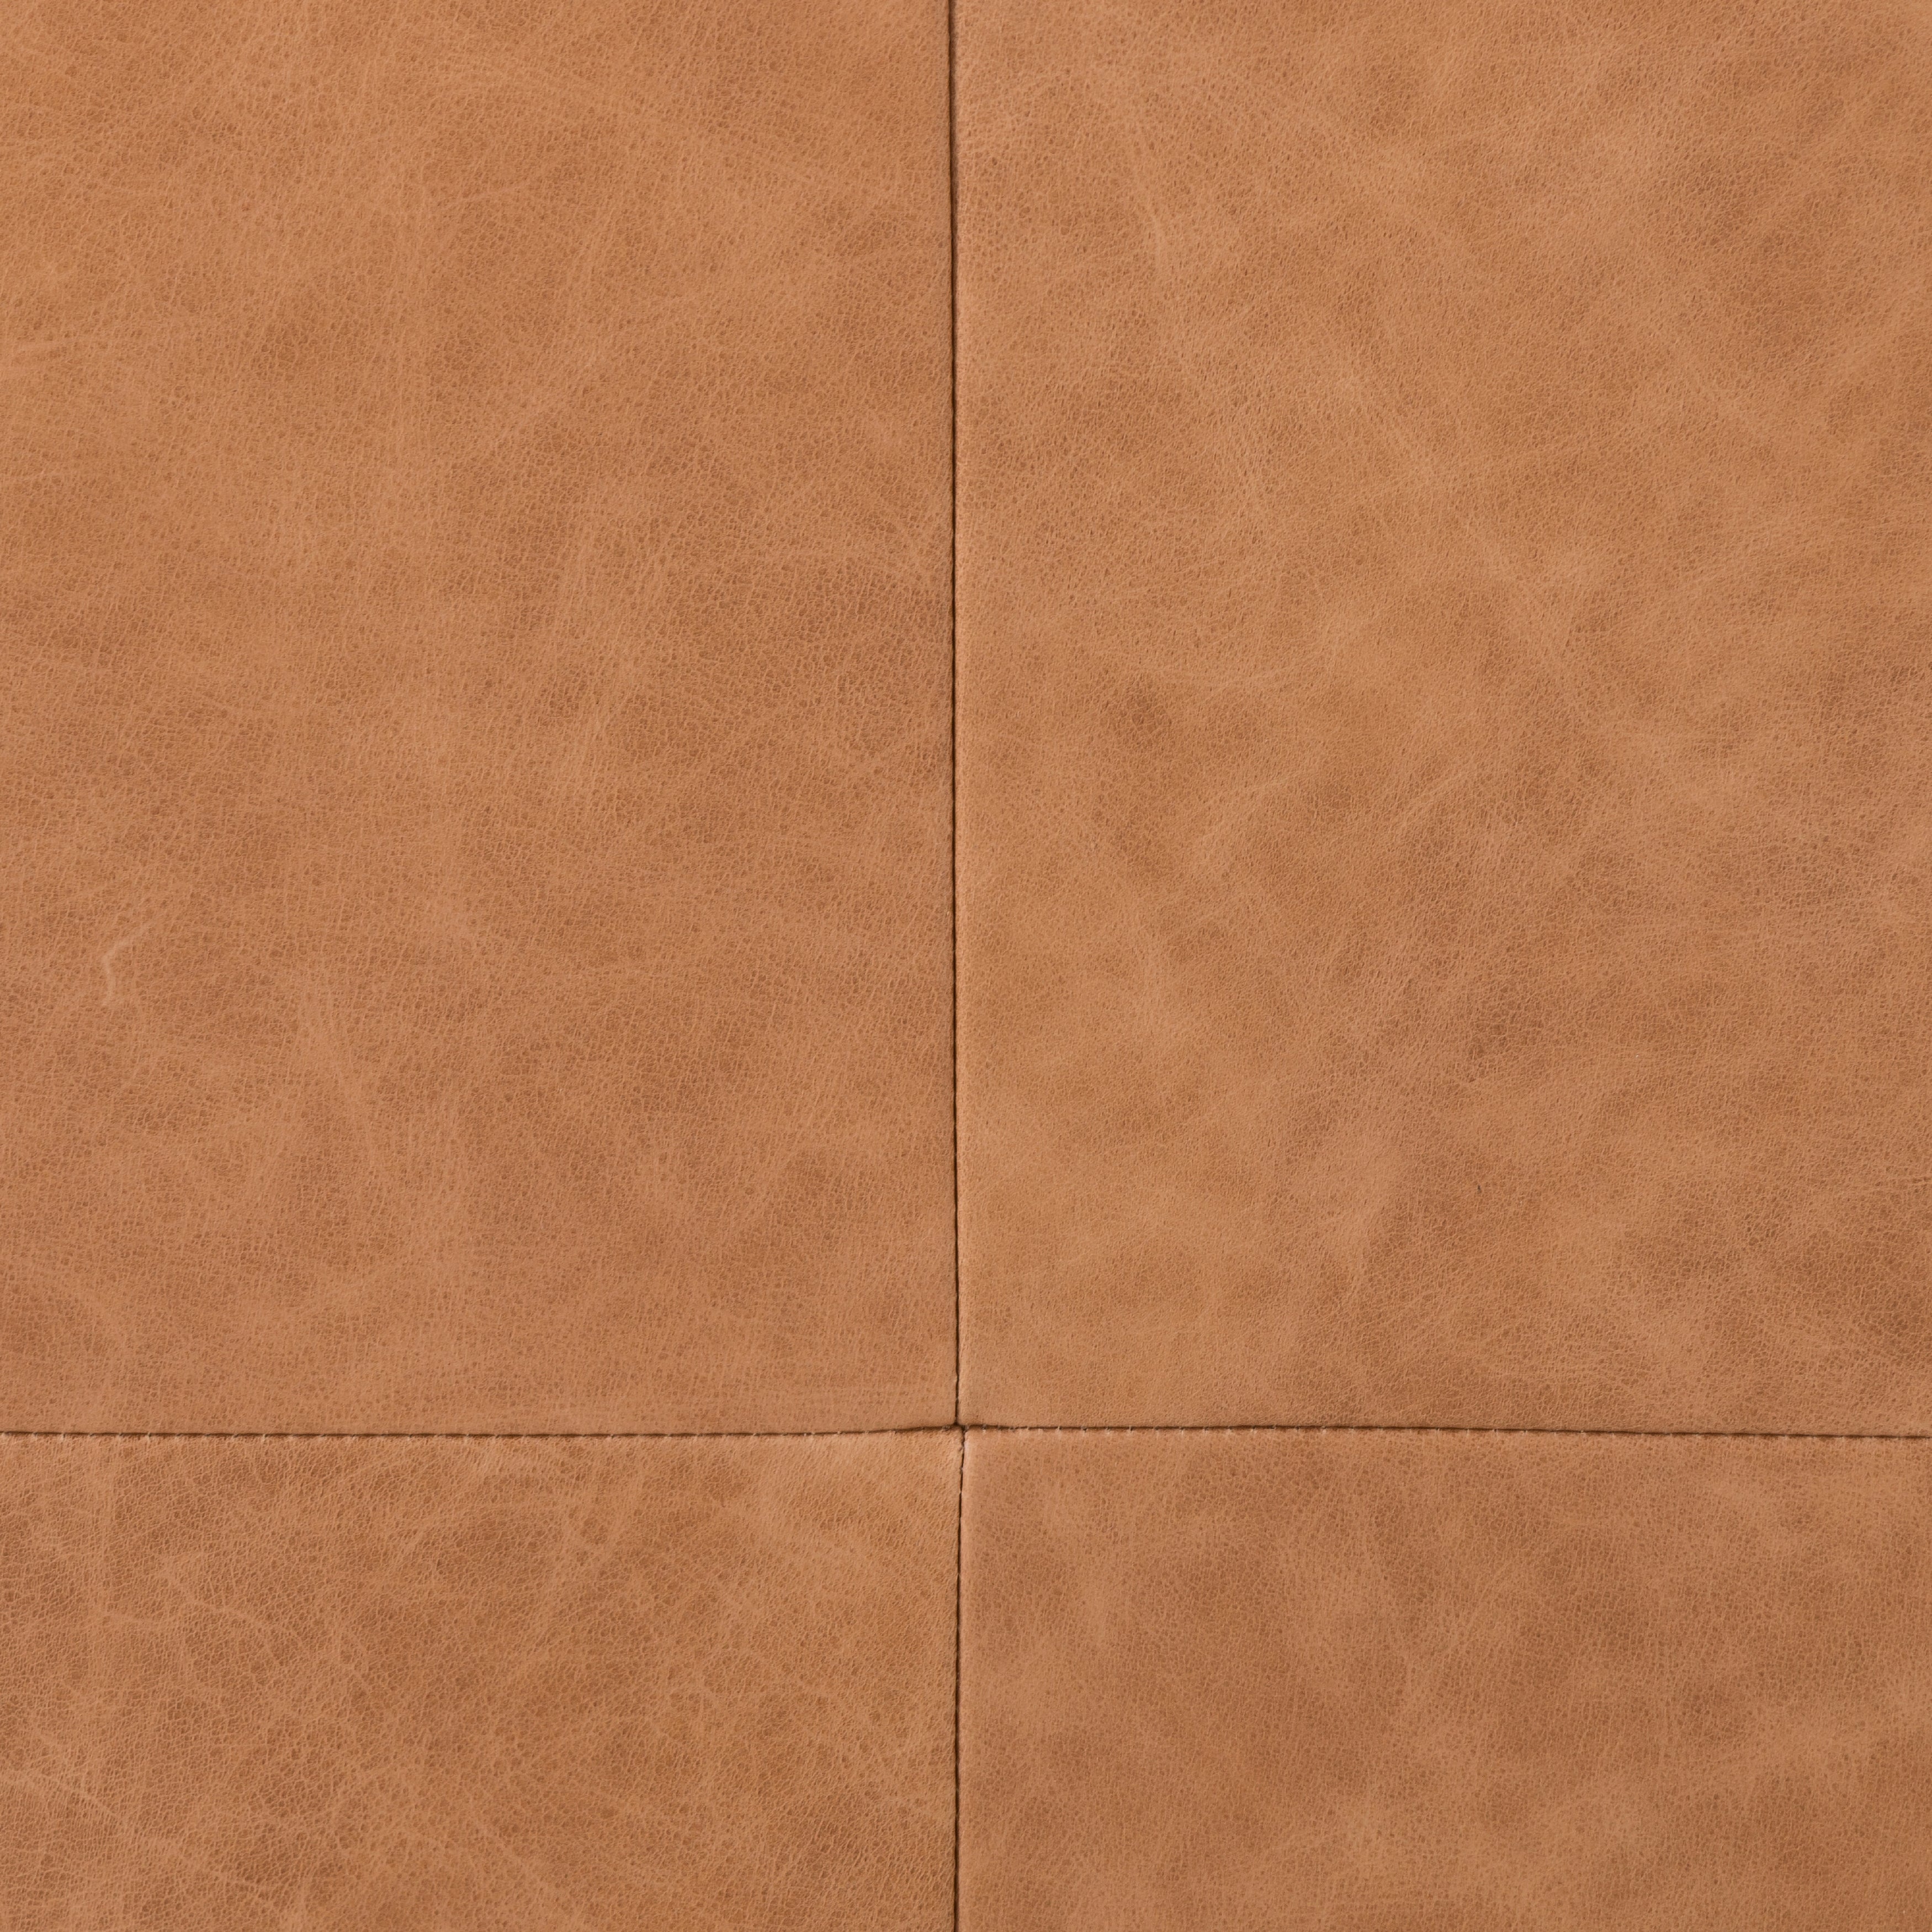 A clean, sophisticated silhouette meets butterscotch top-grain leather with side-arm cutouts, for a balanced look with midcentury vibes. Finished with tapered oak legs. Amethyst Home provides interior design, new construction, custom furniture, and area rugs in the Houston metro area.